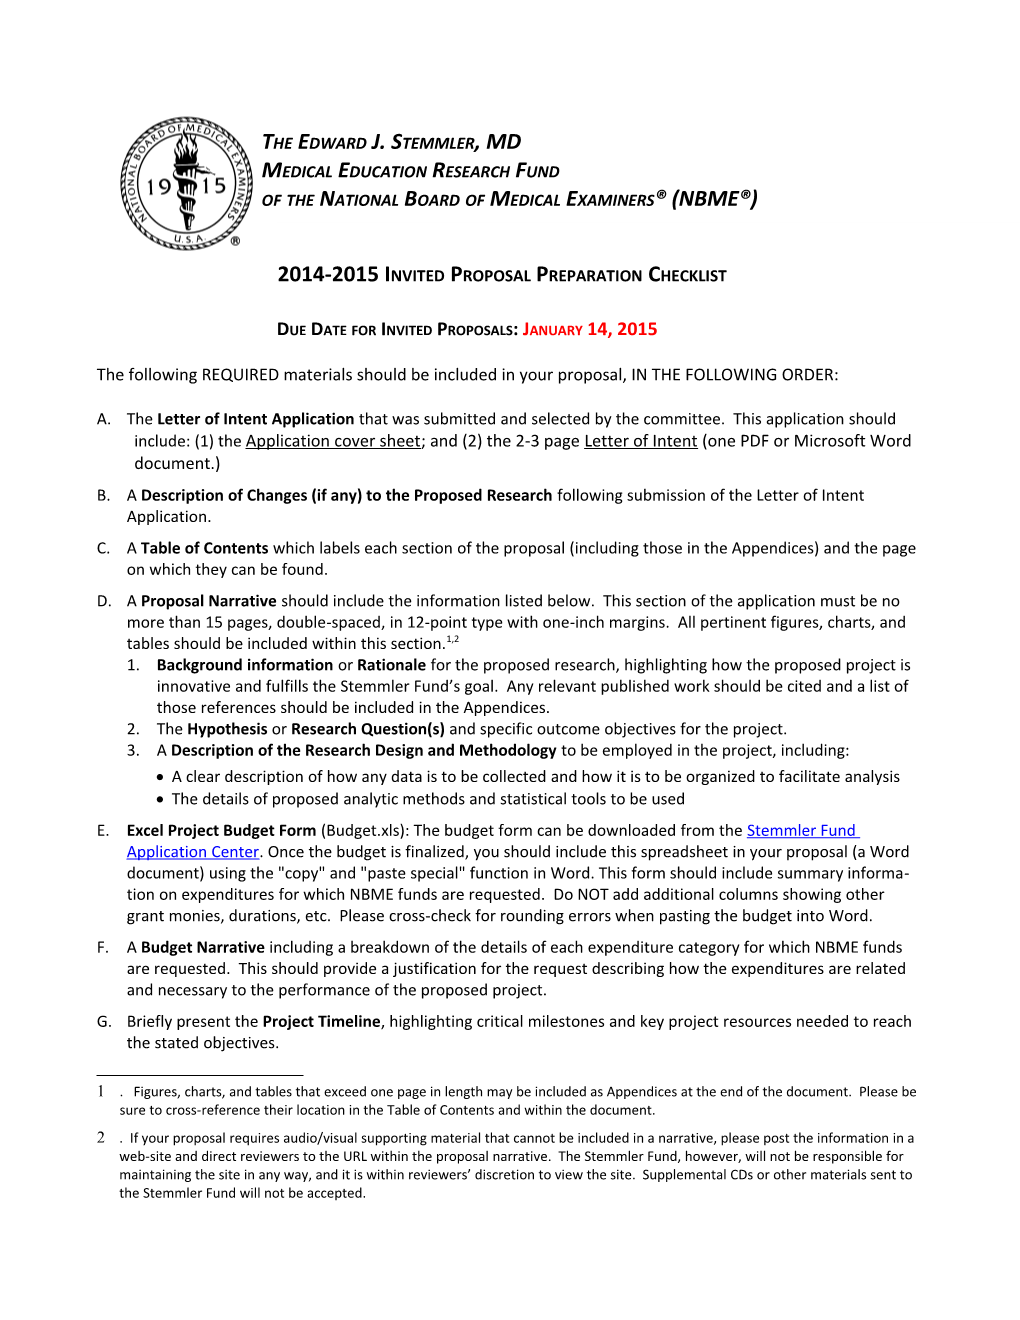 Due Date for Invited Proposals: January 14, 2015